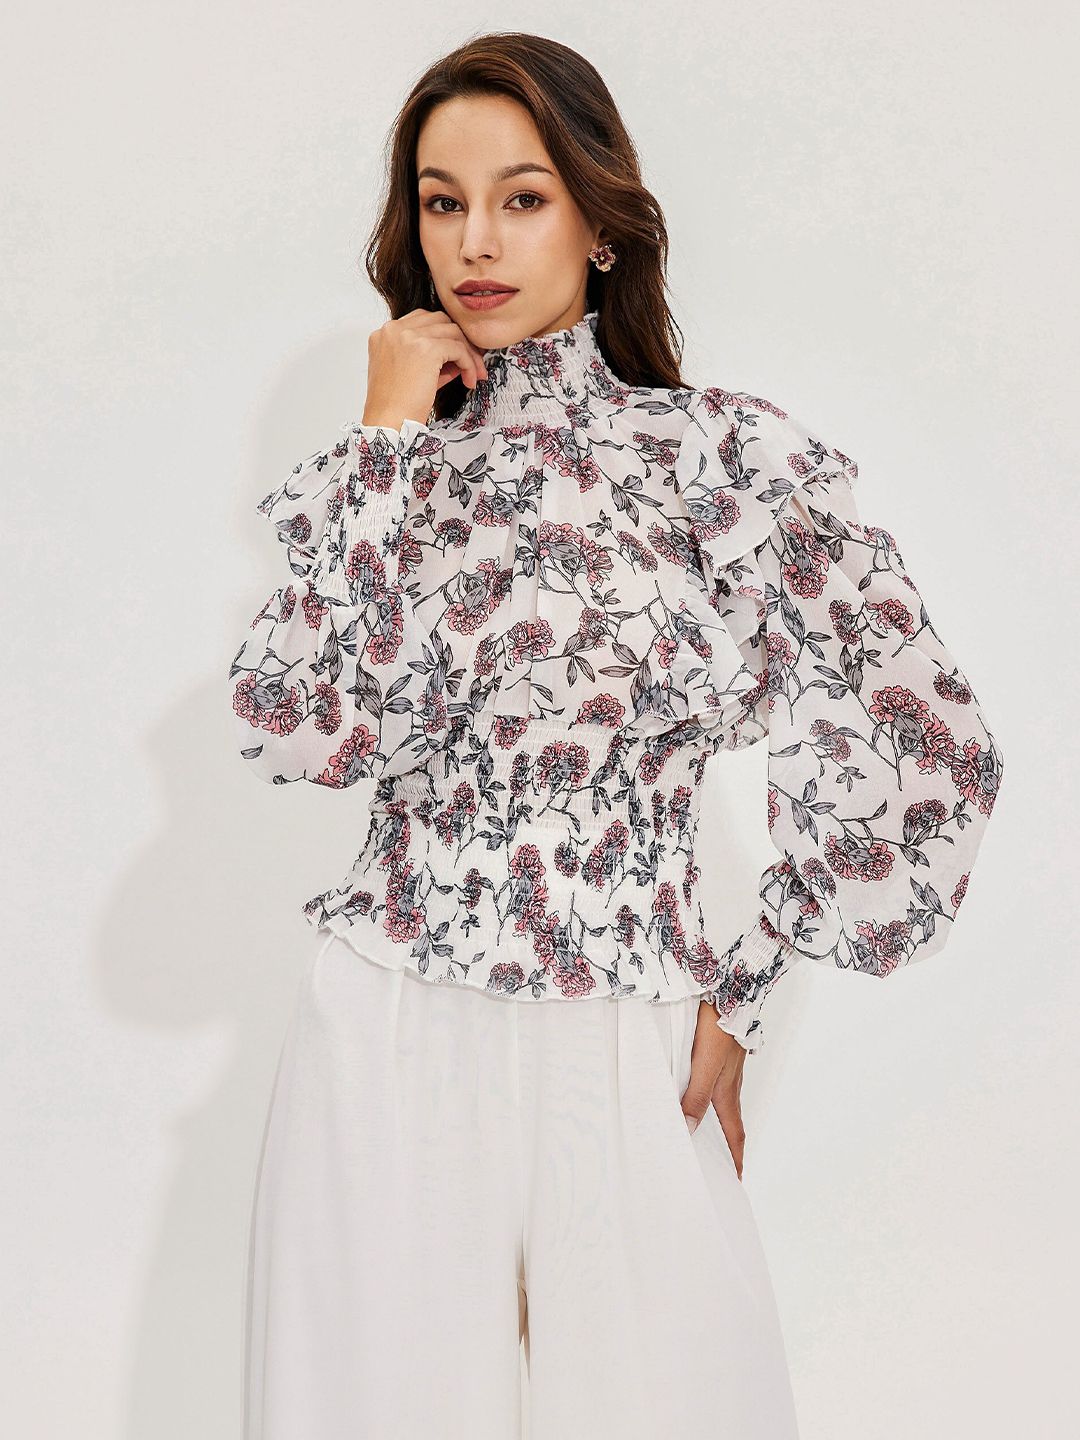 URBANIC White Floral Print Shirt Style Top Price in India